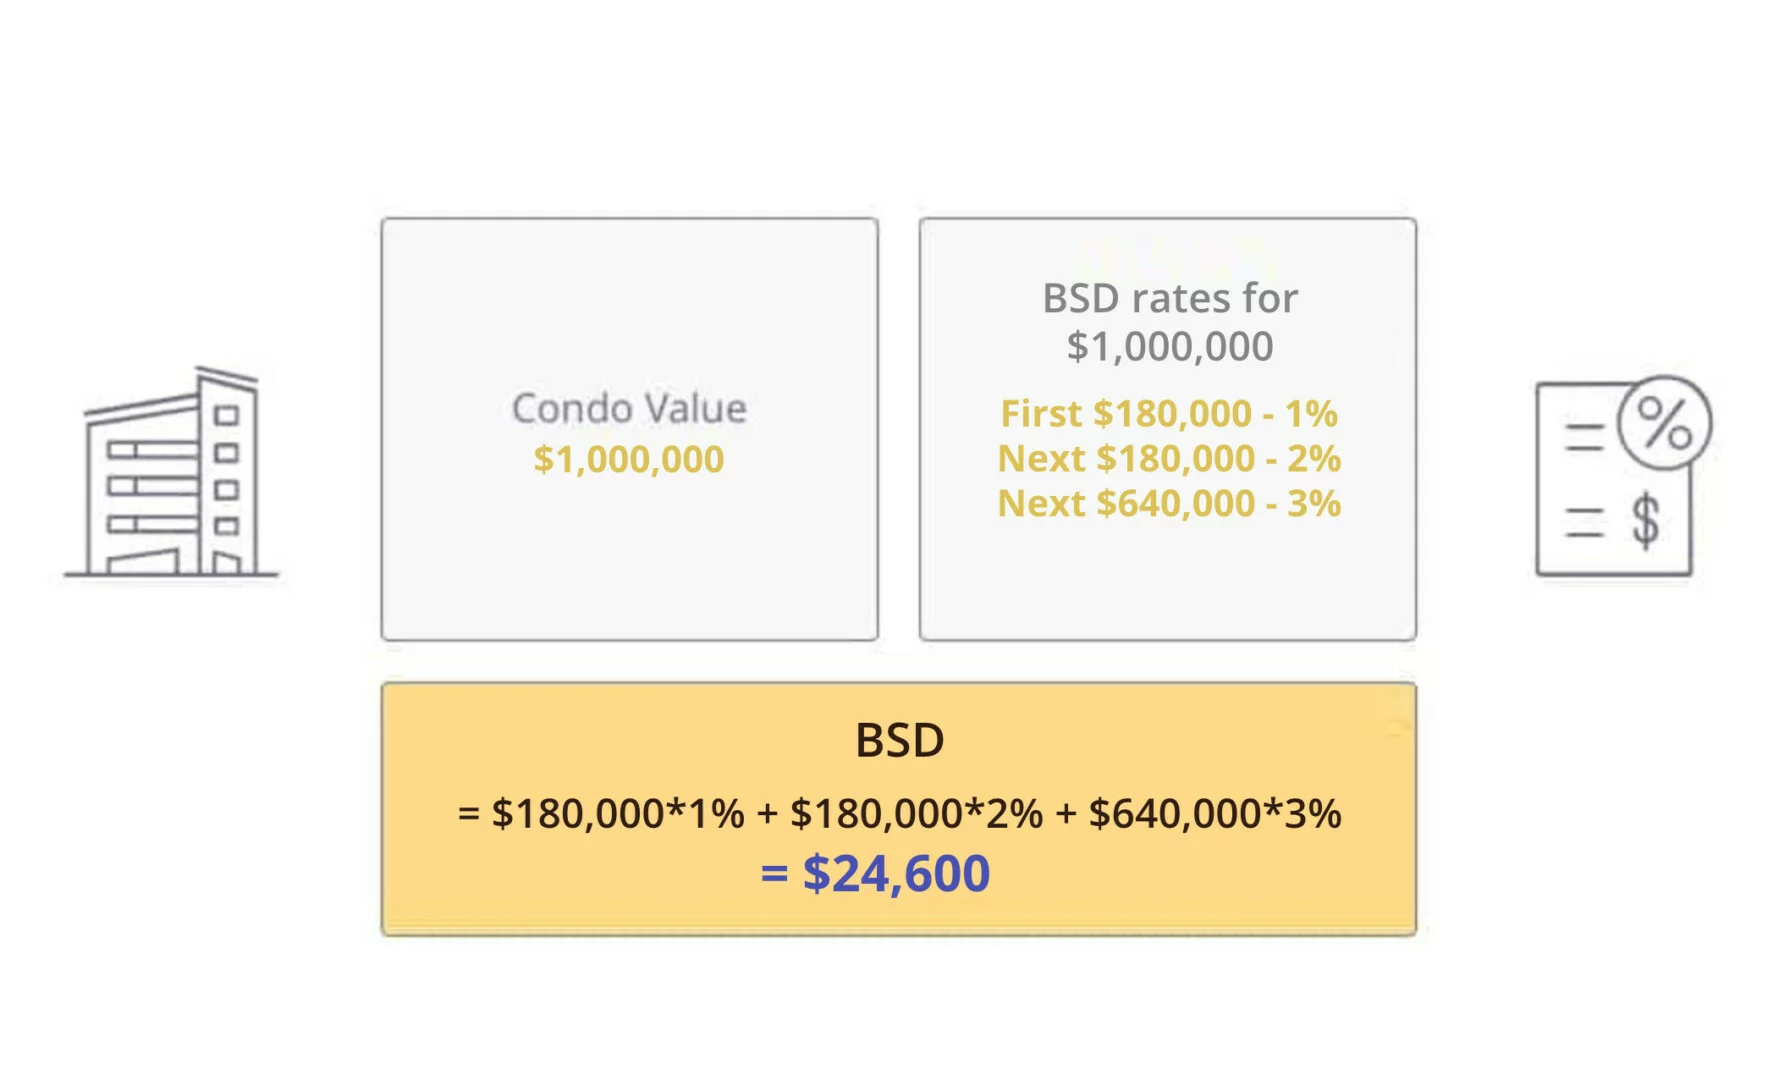 Calculation for the the amount of BSD payable on a $1,000,000 condo